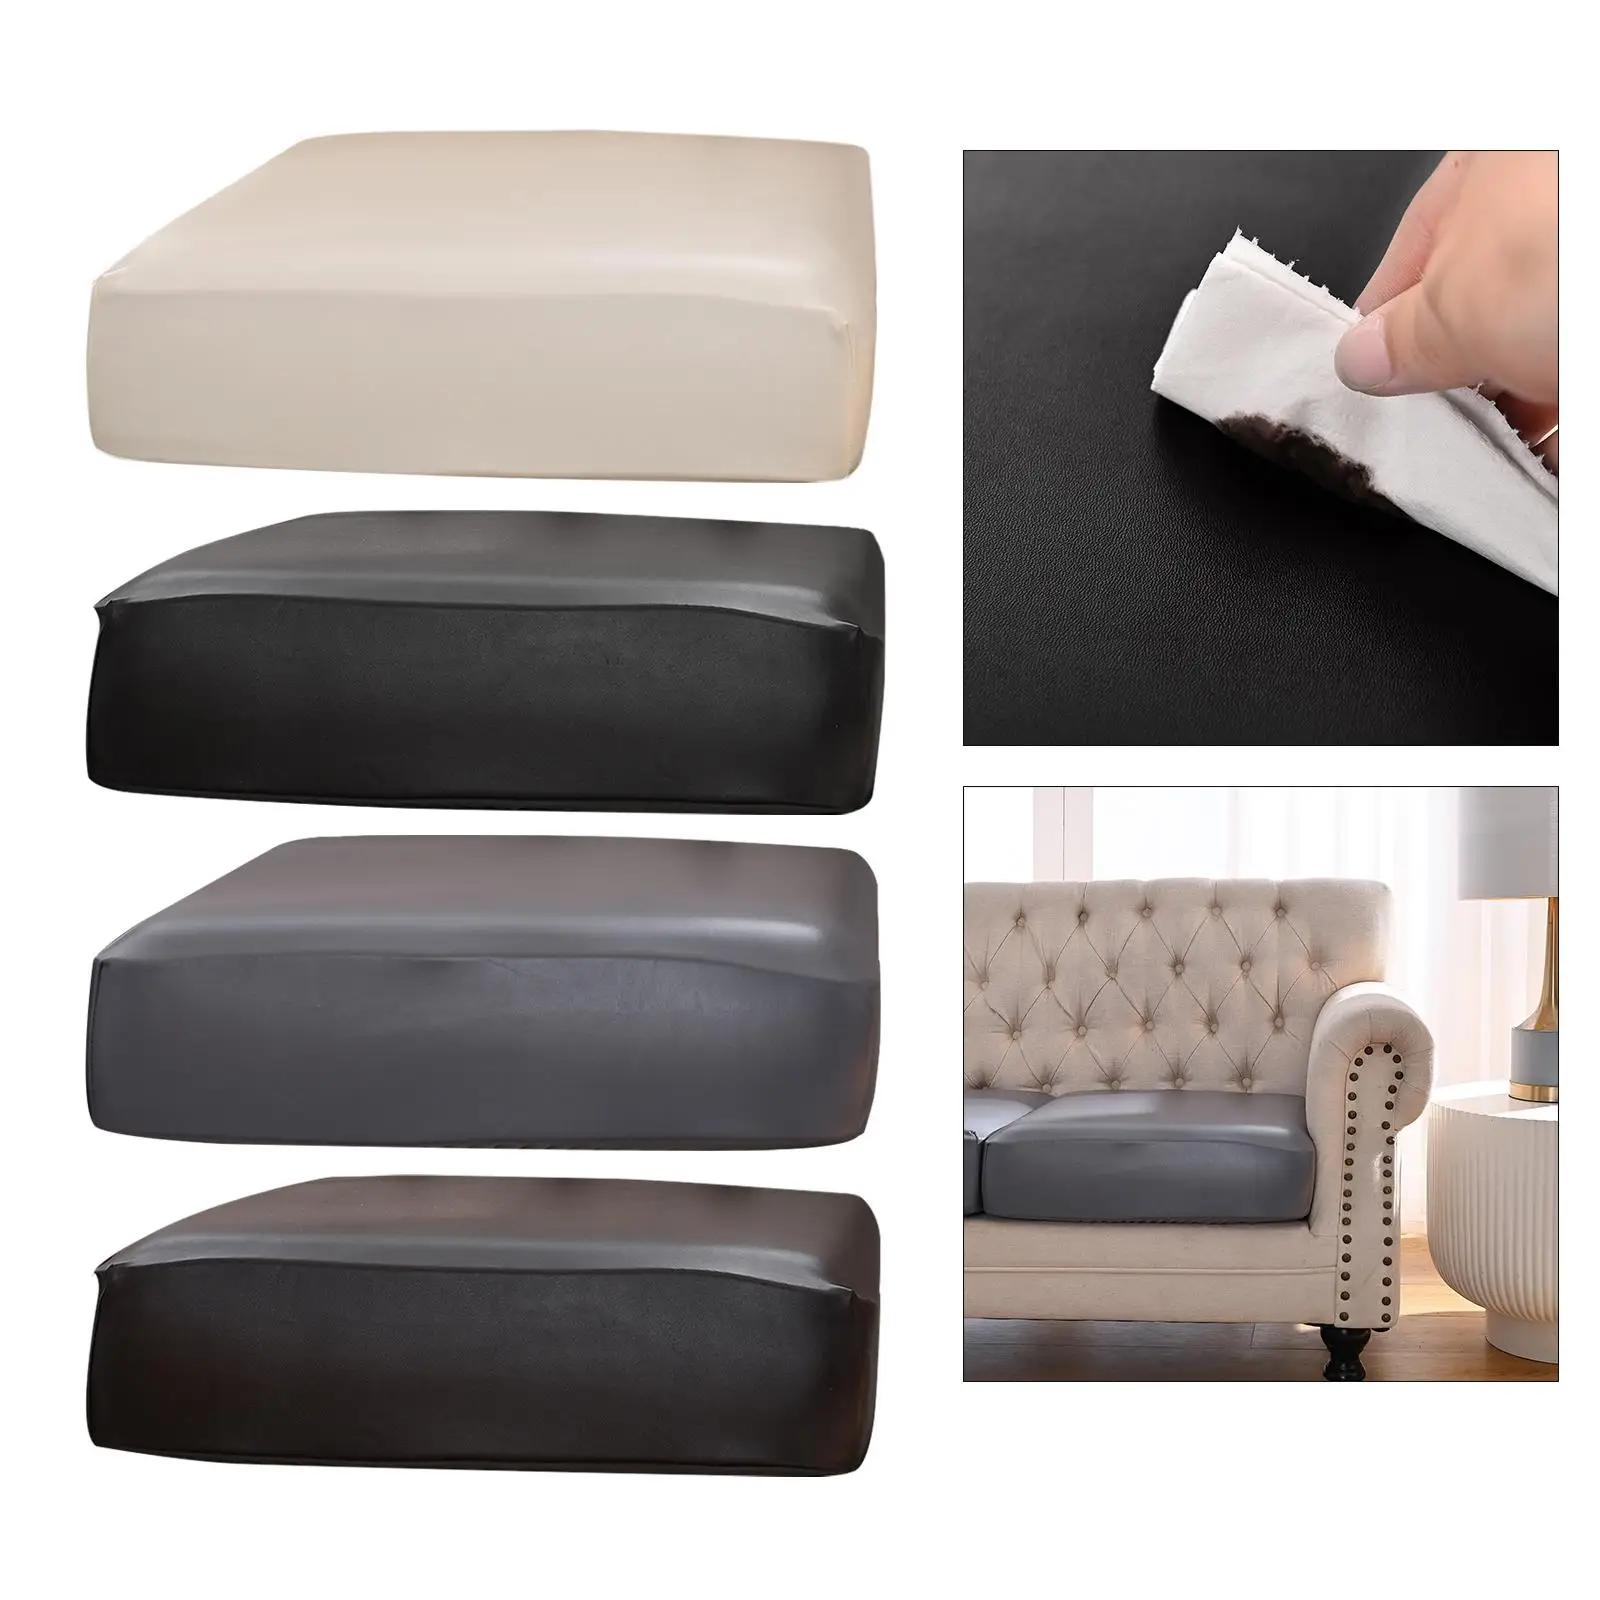 PU Leather Sofa Seat Slipcover Protector Case Stretchy for Living Room Couch